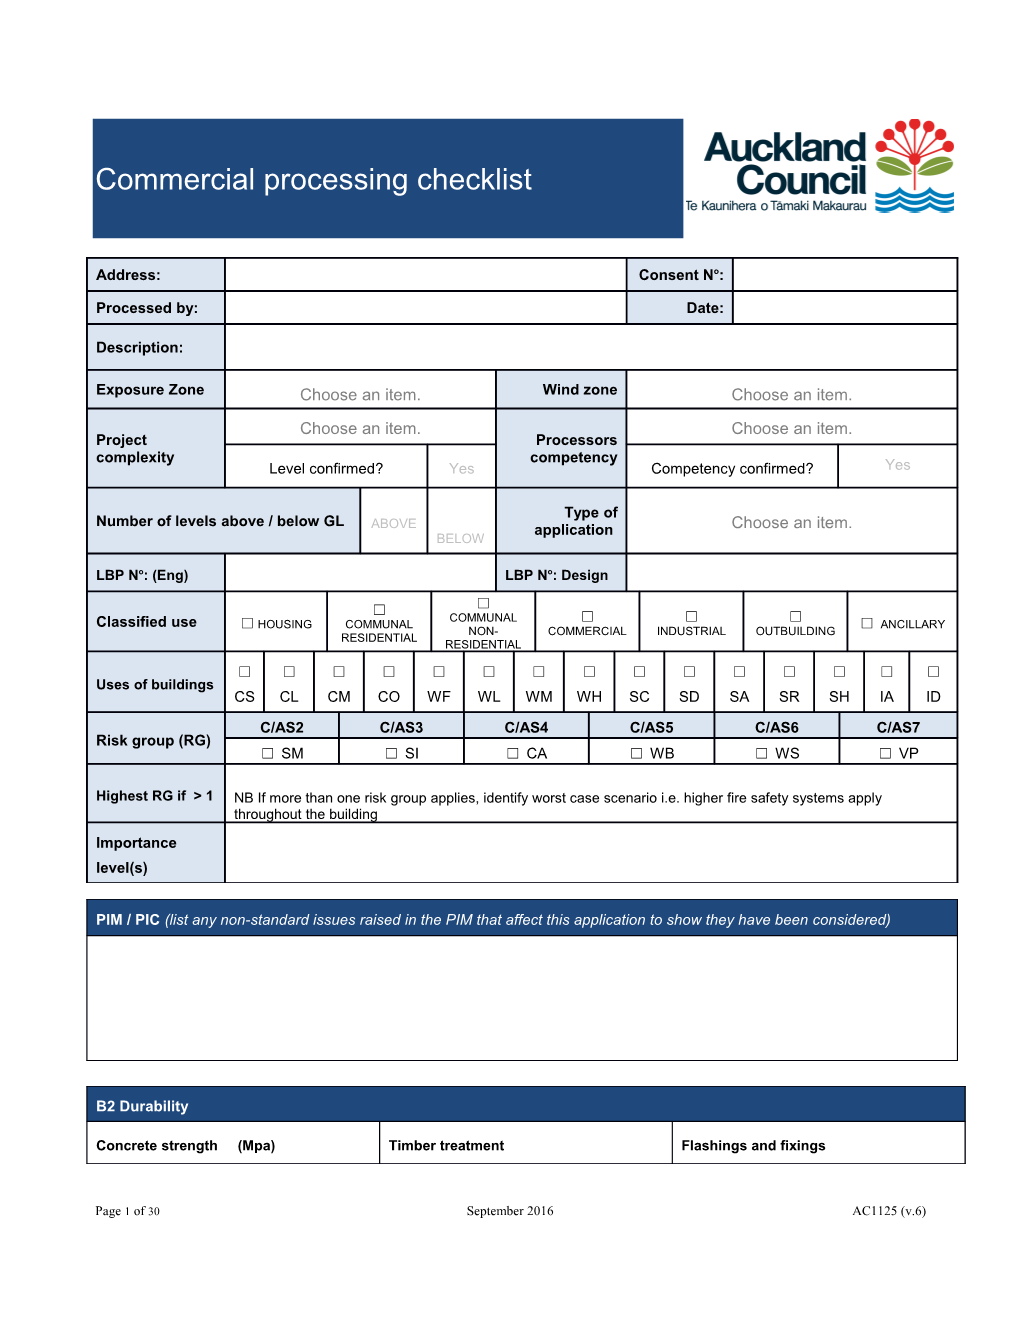 AC1125 Commercial Processing Checklist